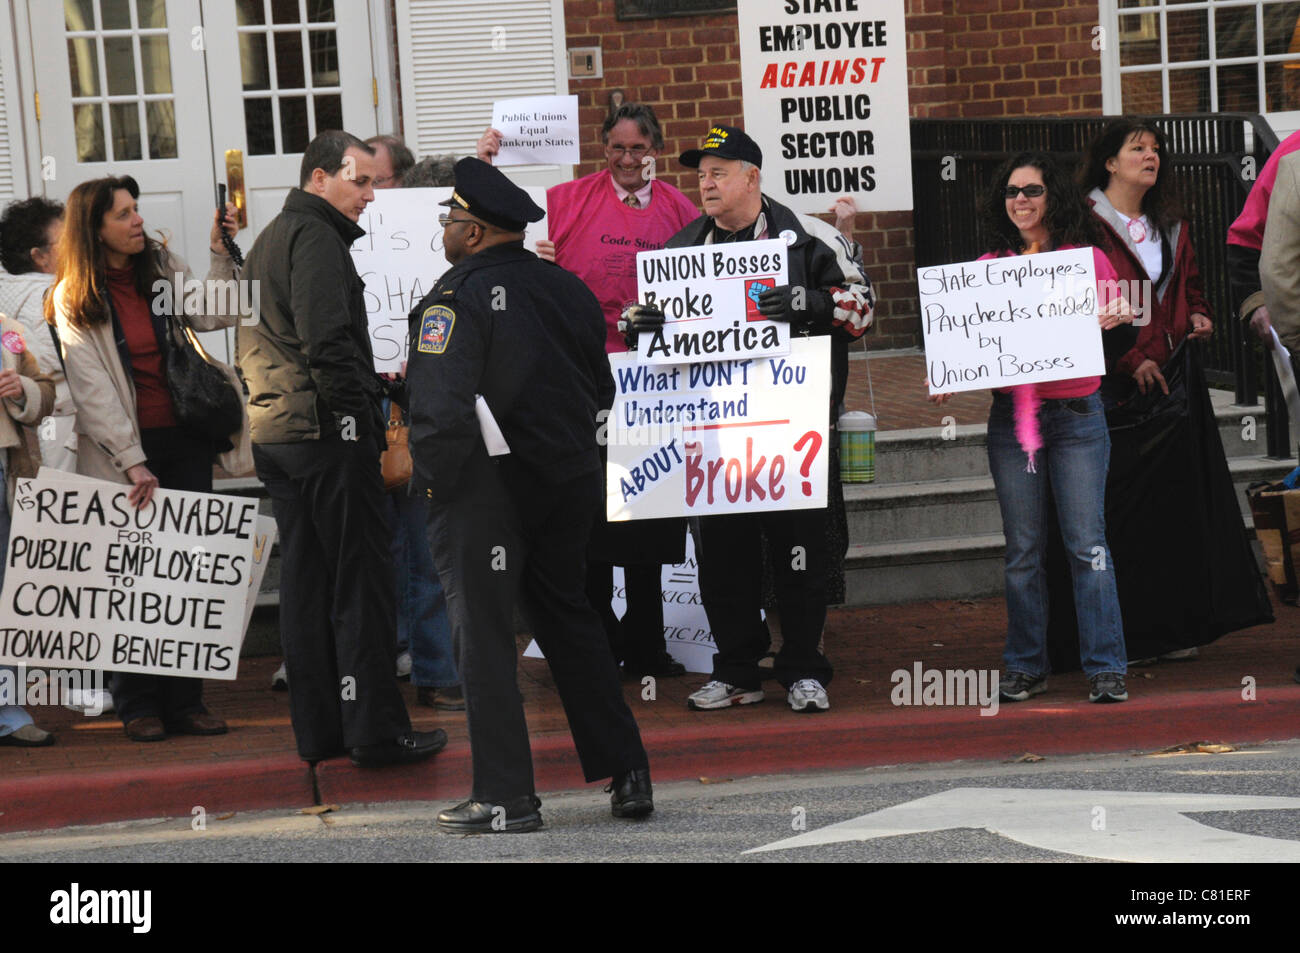 A policeman confronts one of the anti union demonstrator at their demonstration in Annapolis, Maryland Stock Photo